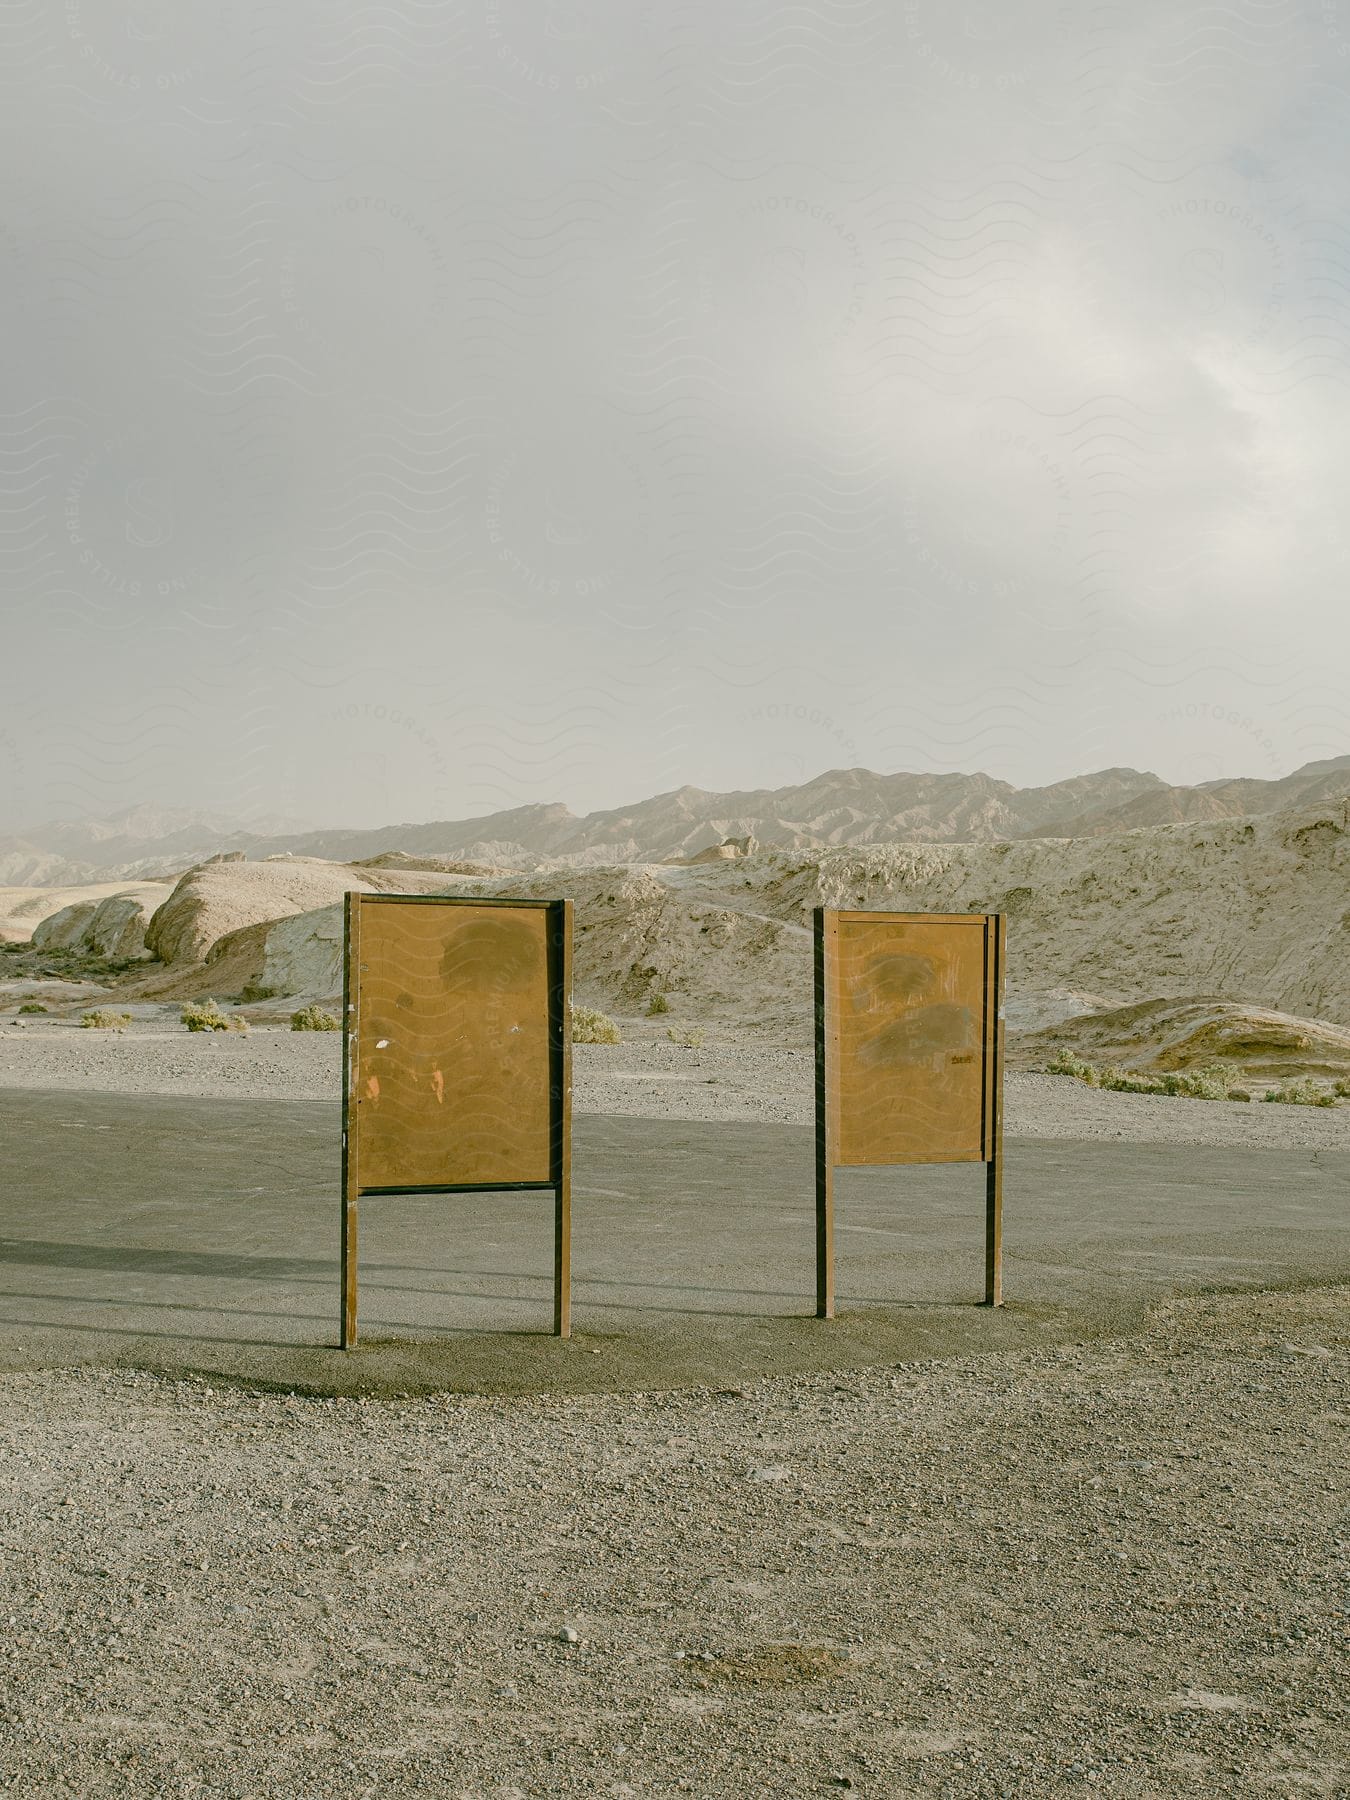 two weathered signs resting against each other in a desert landscape